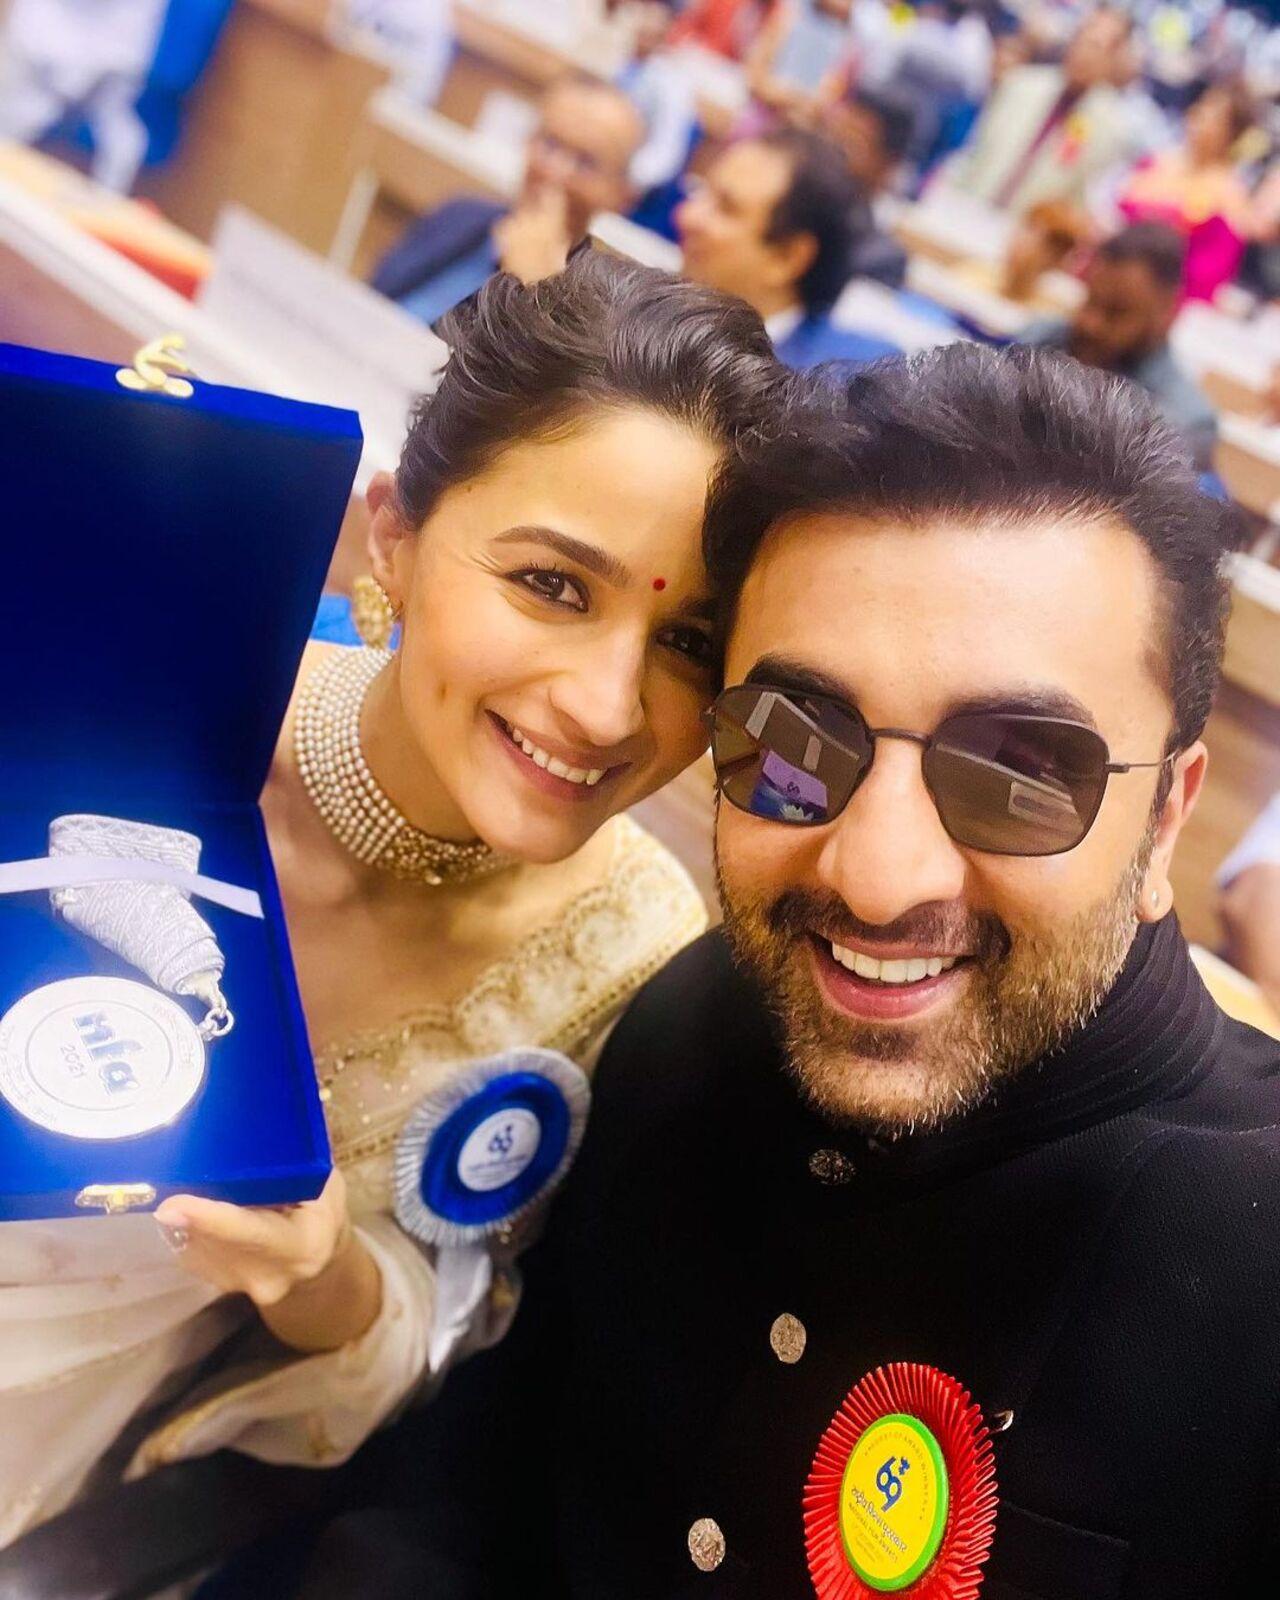 Alia Bhatt posed with her husband Ranbir Kapoor while holding her National Award certificate